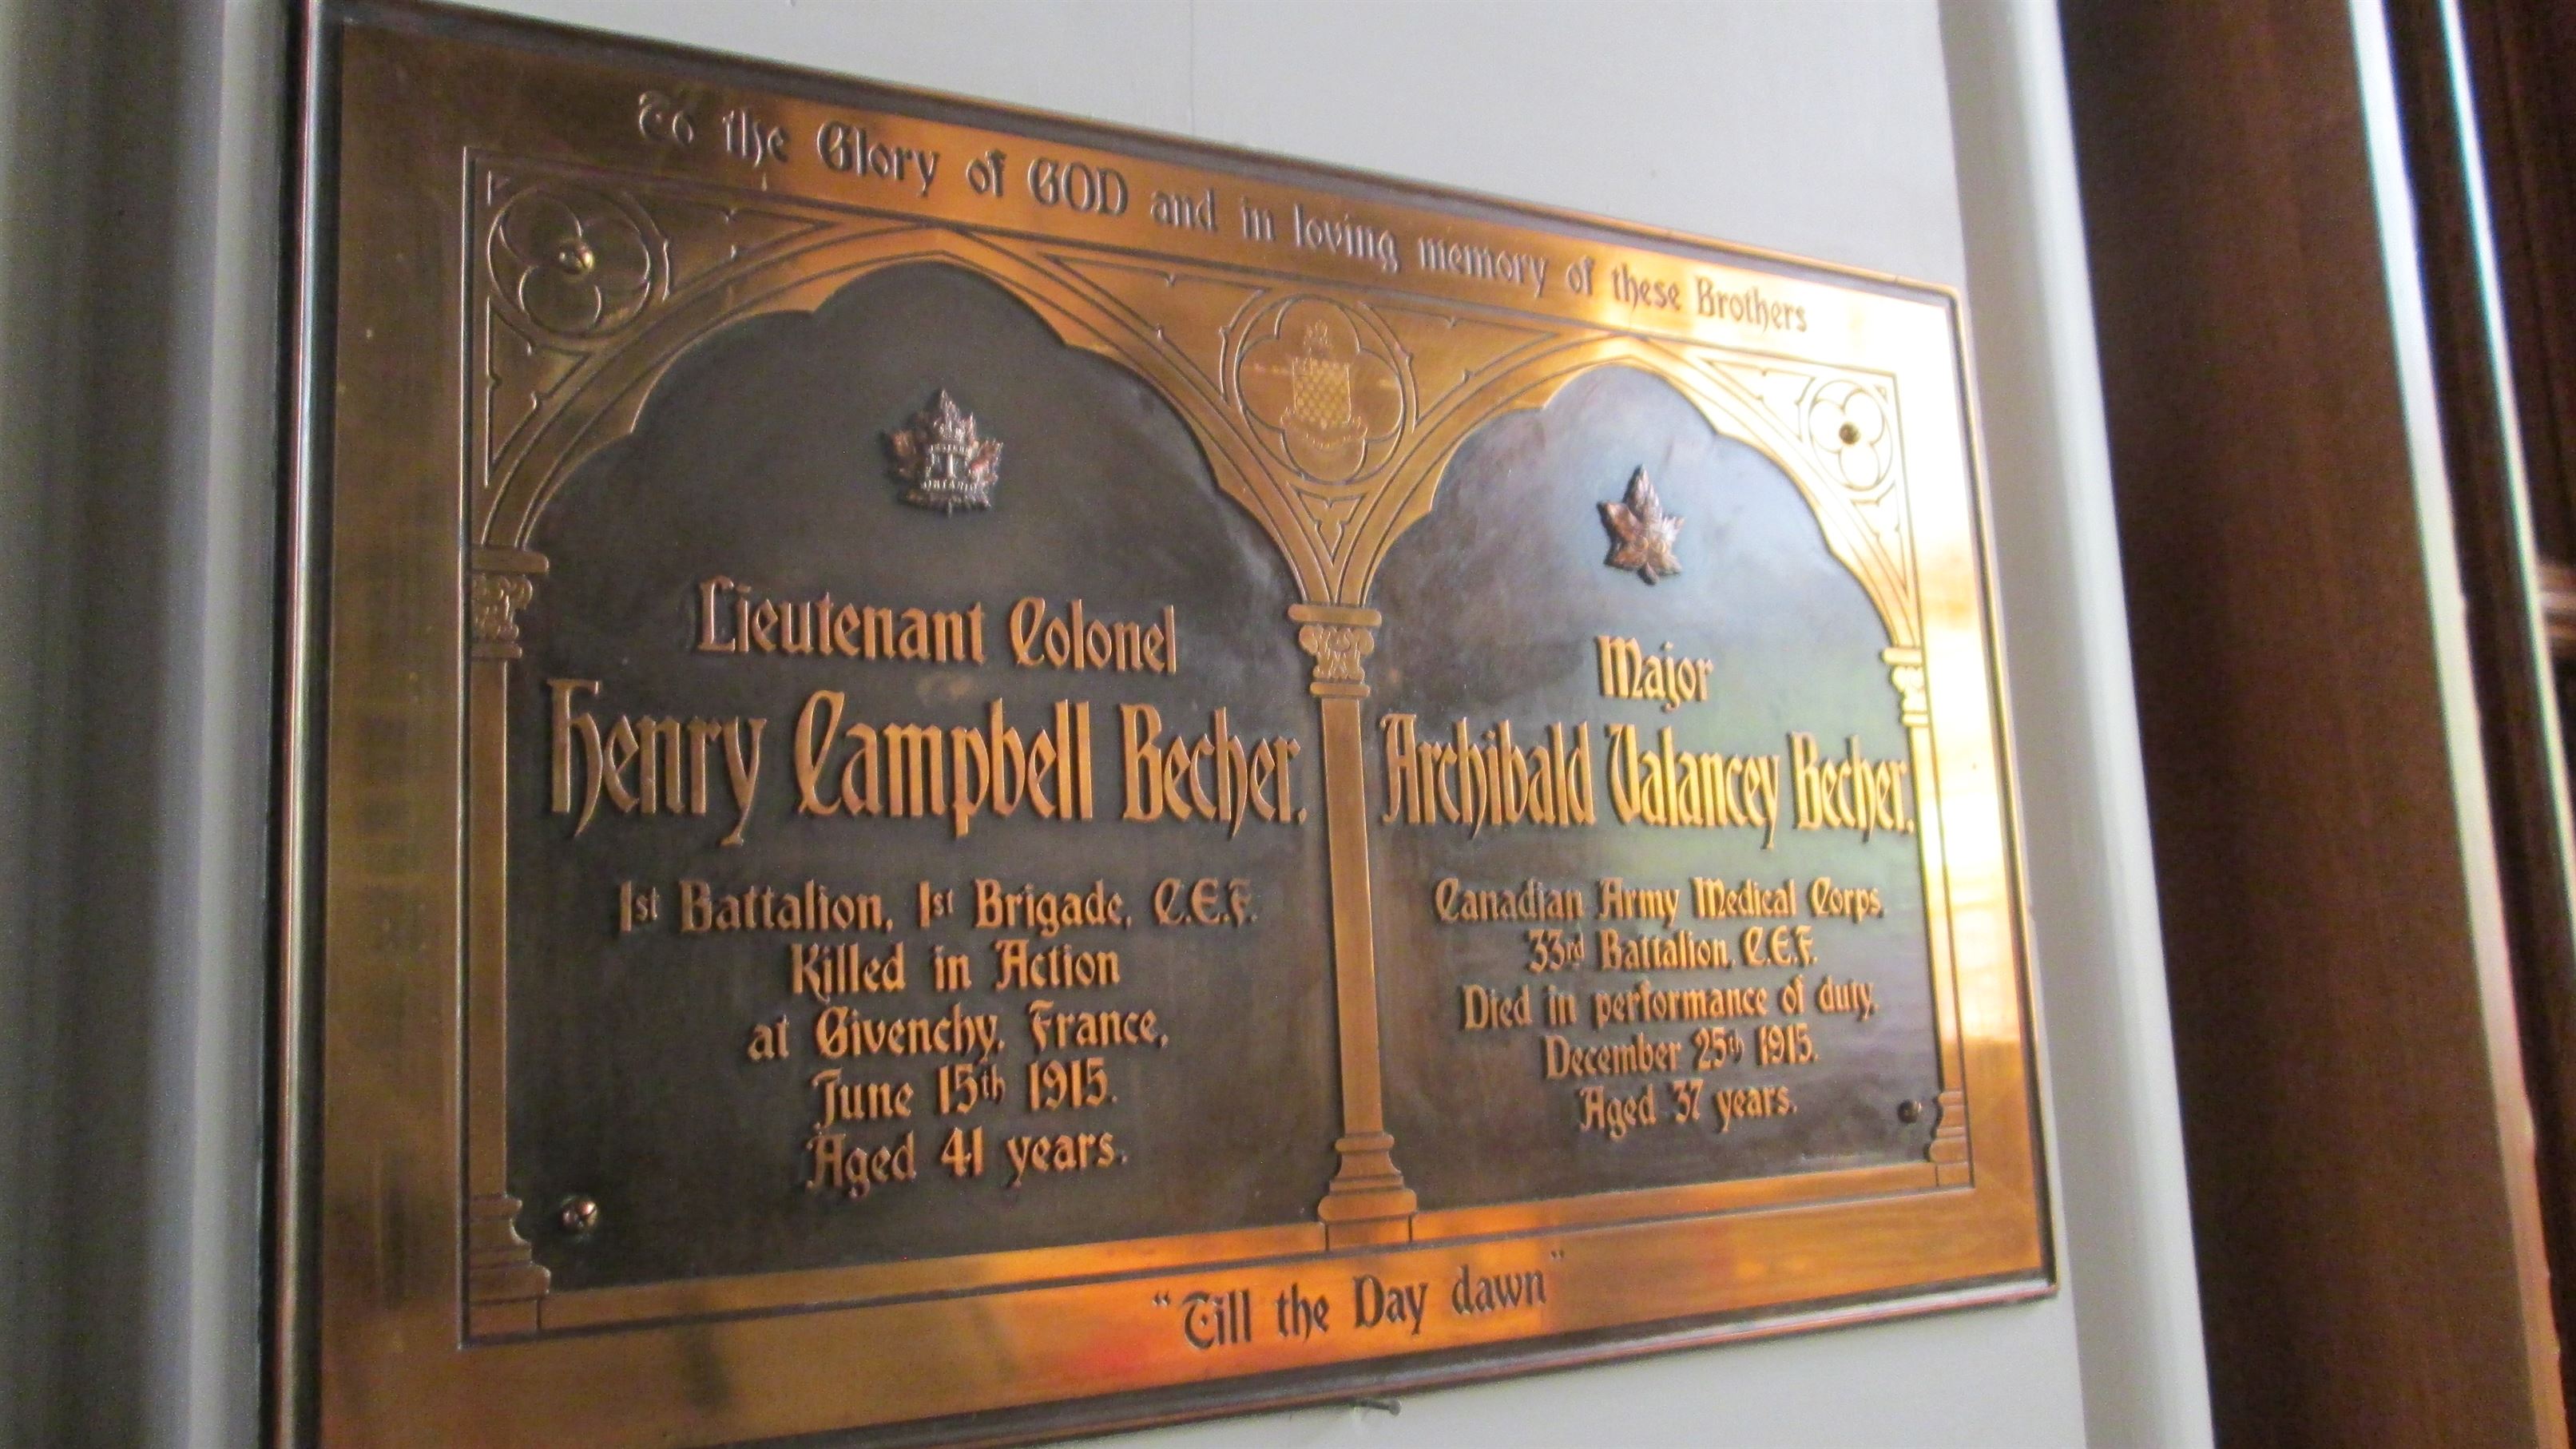 Photo 1- St Paul's Cathedral- Becher plaque (photo by R. Turcotte)